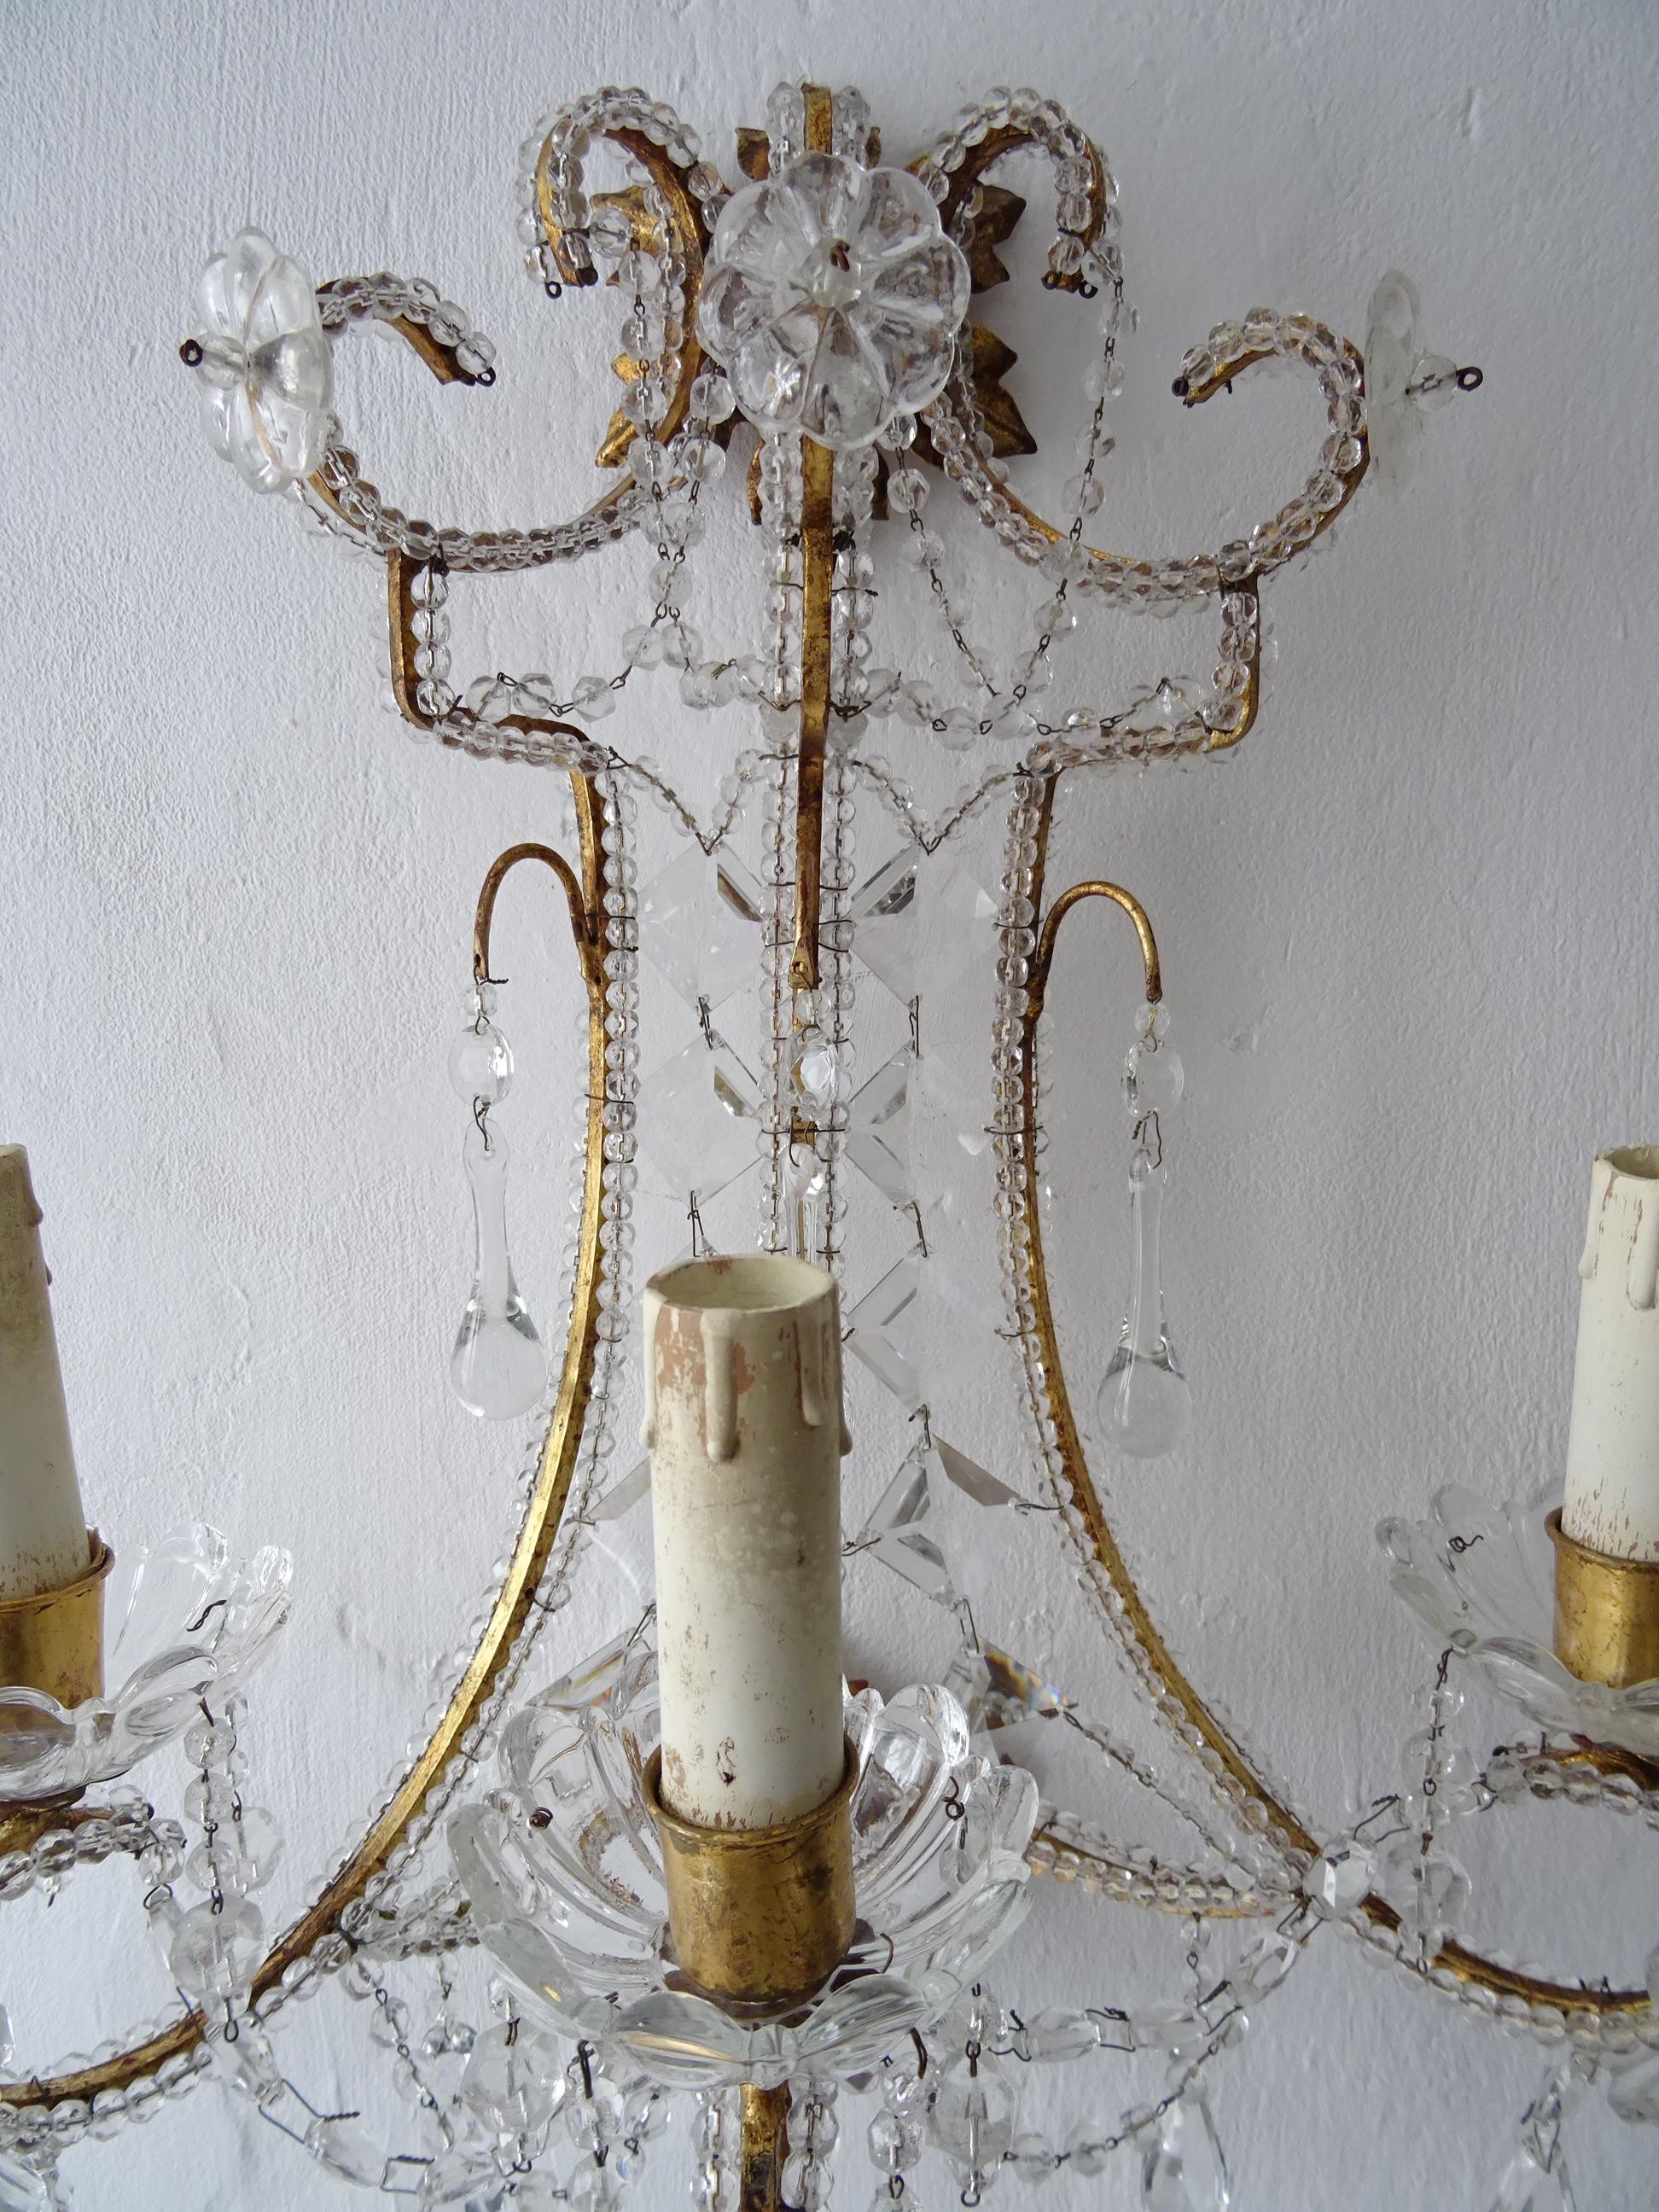 Italian Big Beaded Crystal Prisms Murano Drops Sconces Gold Gilt Metal c1900 For Sale 4